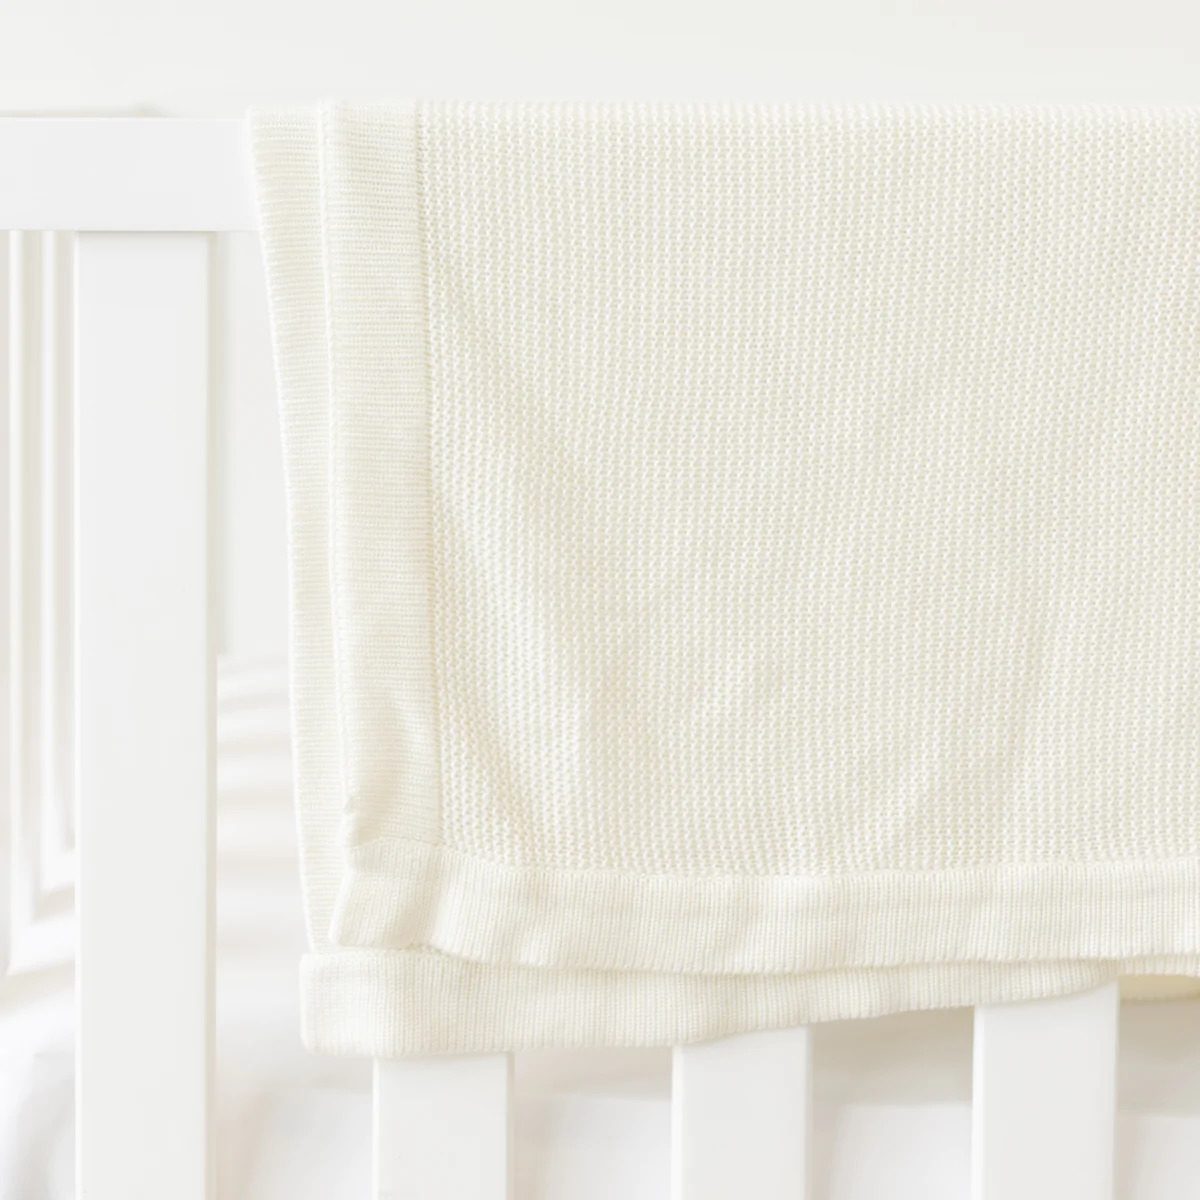 <p>Babies outgrow toys and clothes in the blink of an eye, but this soft and dreamy <a href="https://cozyearth.com/products/cloud-knit-baby-blanket" rel="noopener noreferrer">baby blanket</a>, which is made from bamboo viscose, is something that will offer them warmth, comfort and security for years to come—so much so that we wouldn't be surprised if they took this blankie to college! Next, take a look at these adorable <a href="https://www.rd.com/list/stocking-stuffers-toddlers/" rel="noopener noreferrer">stocking stuffers for toddlers</a>.</p> <p class="listicle-page__cta-button-shop"><a class="shop-btn" href="https://cozyearth.com/products/cloud-knit-baby-blanket">Shop Now</a></p>